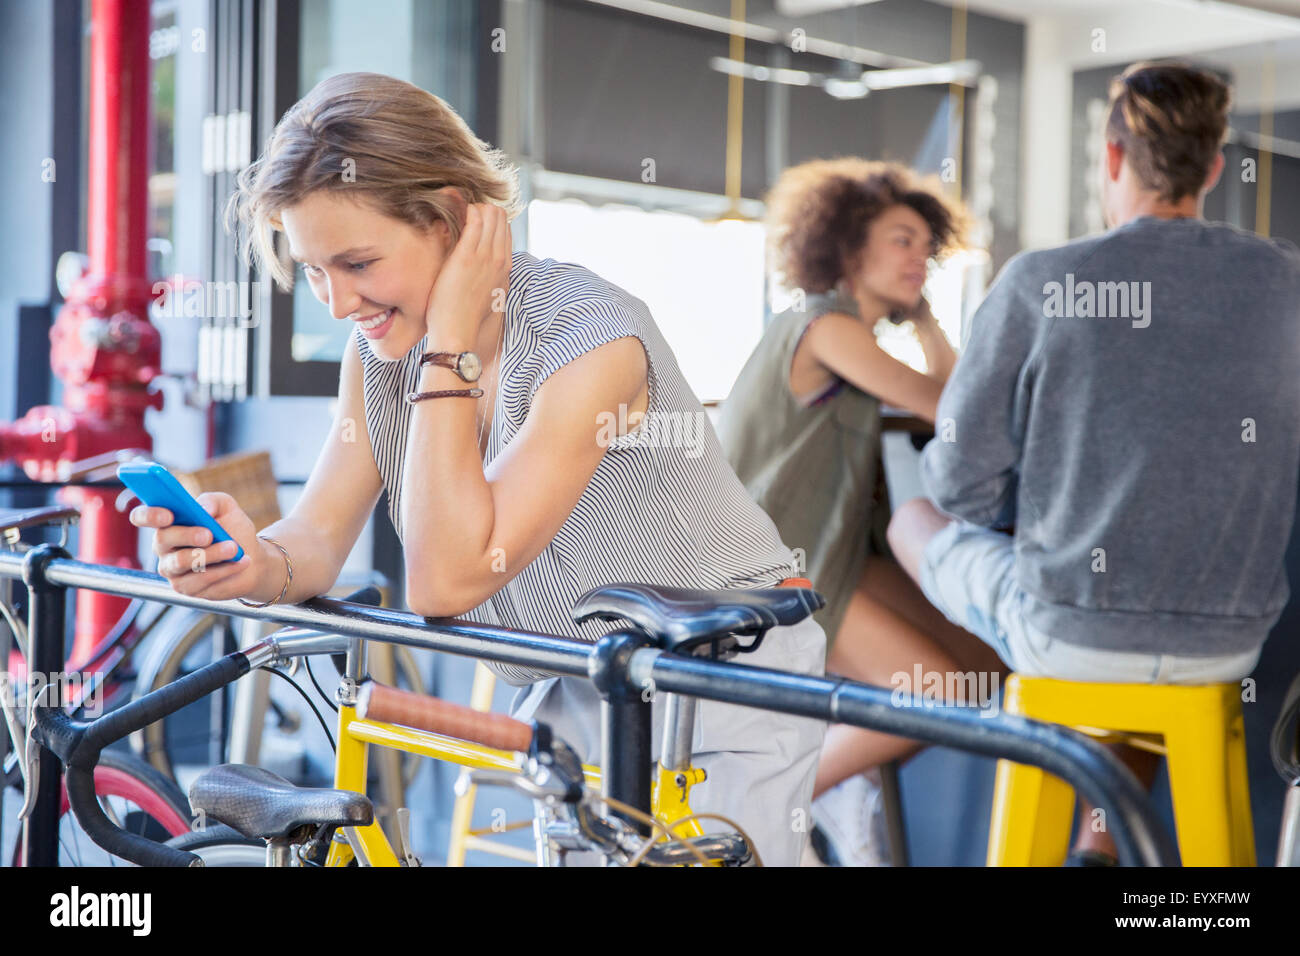 Smiling woman texting with cell phone at railing above bicycle Stock Photo